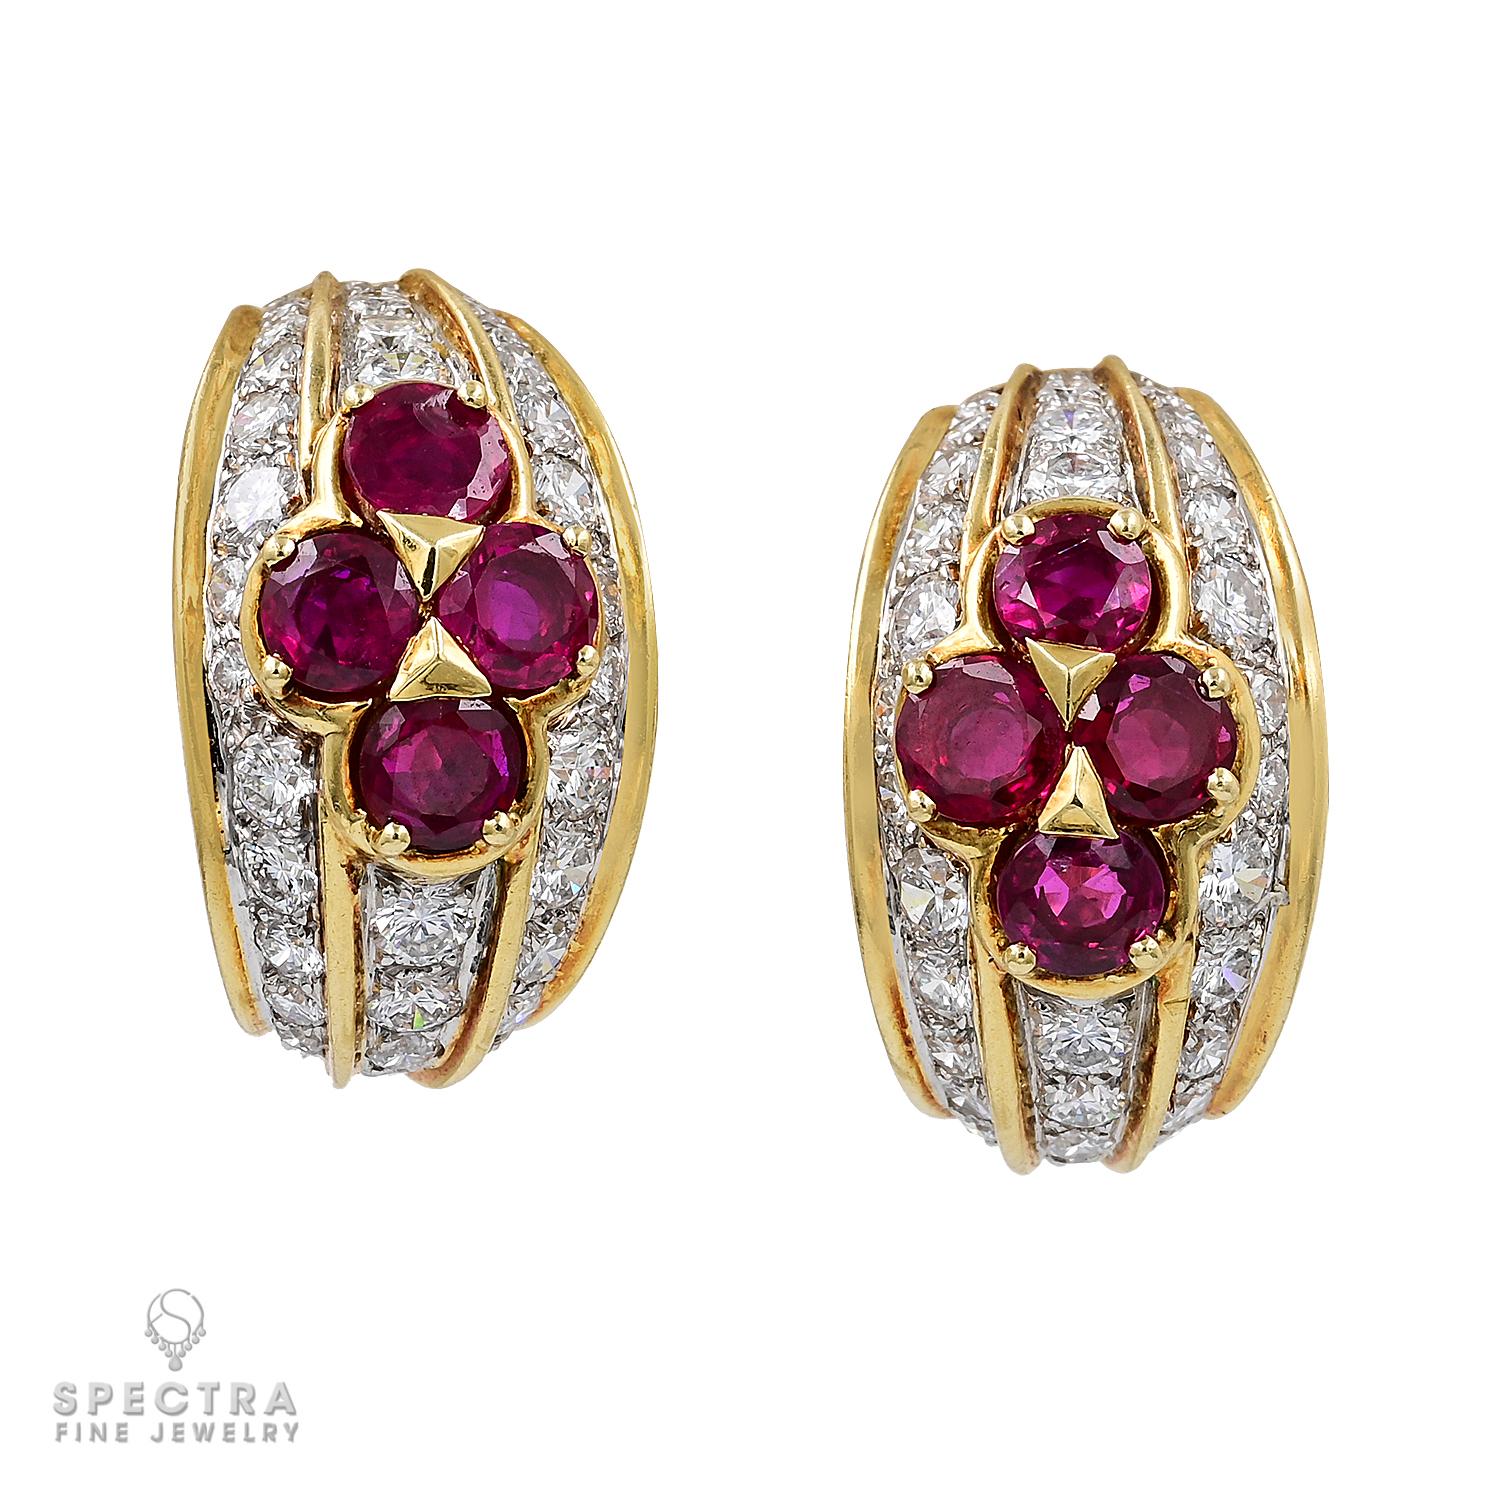 The rubies in a Van Cleef & Arpels jewel are a beautiful sight to behold, rich in coloration with a subtle sparkle. The Maison has distinguished itself since its establishment at Place Vendôme in Paris in 1906 with the creativity of its designs and